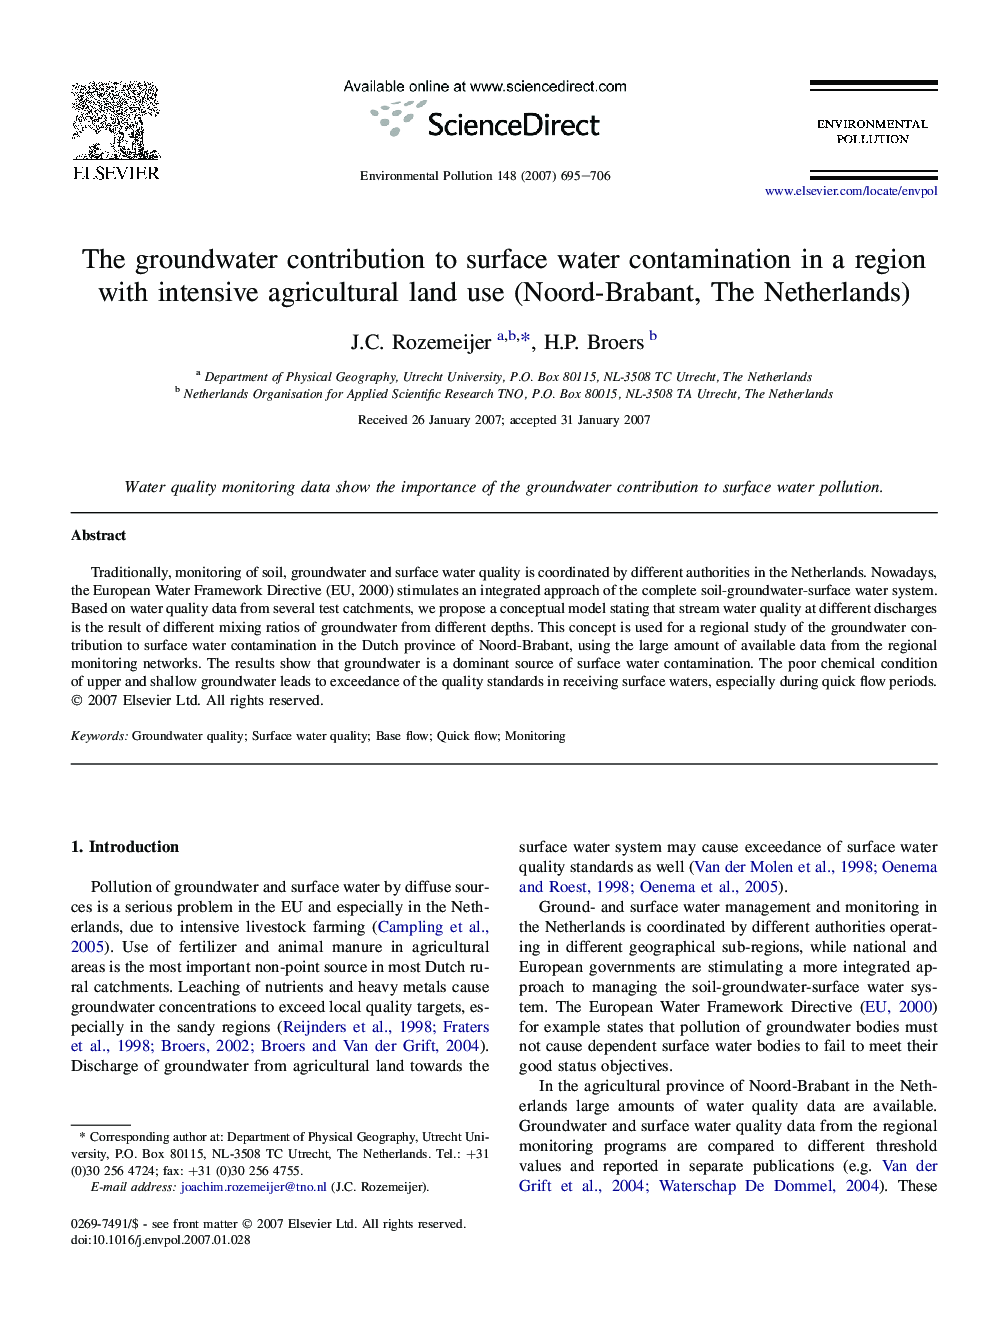 The groundwater contribution to surface water contamination in a region with intensive agricultural land use (Noord-Brabant, The Netherlands)